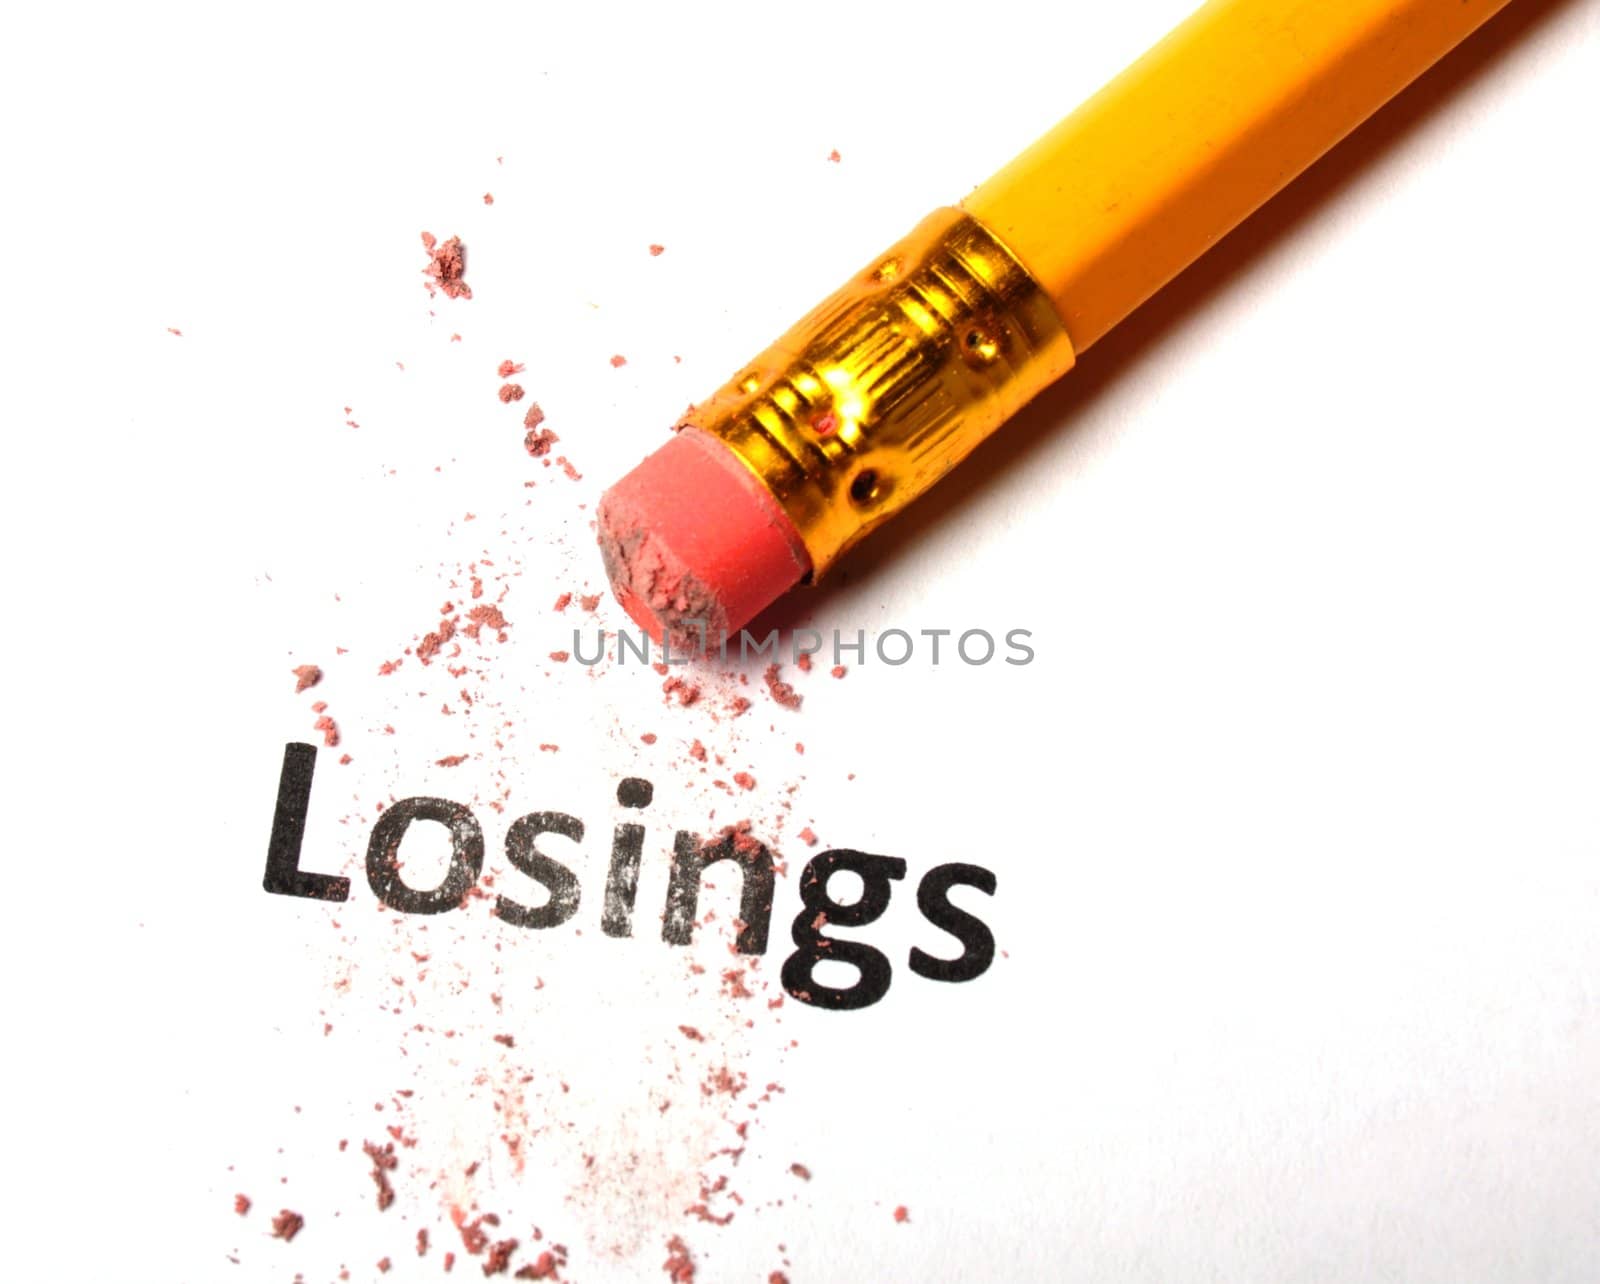 losing lose or luck concept with word and eraser on white background